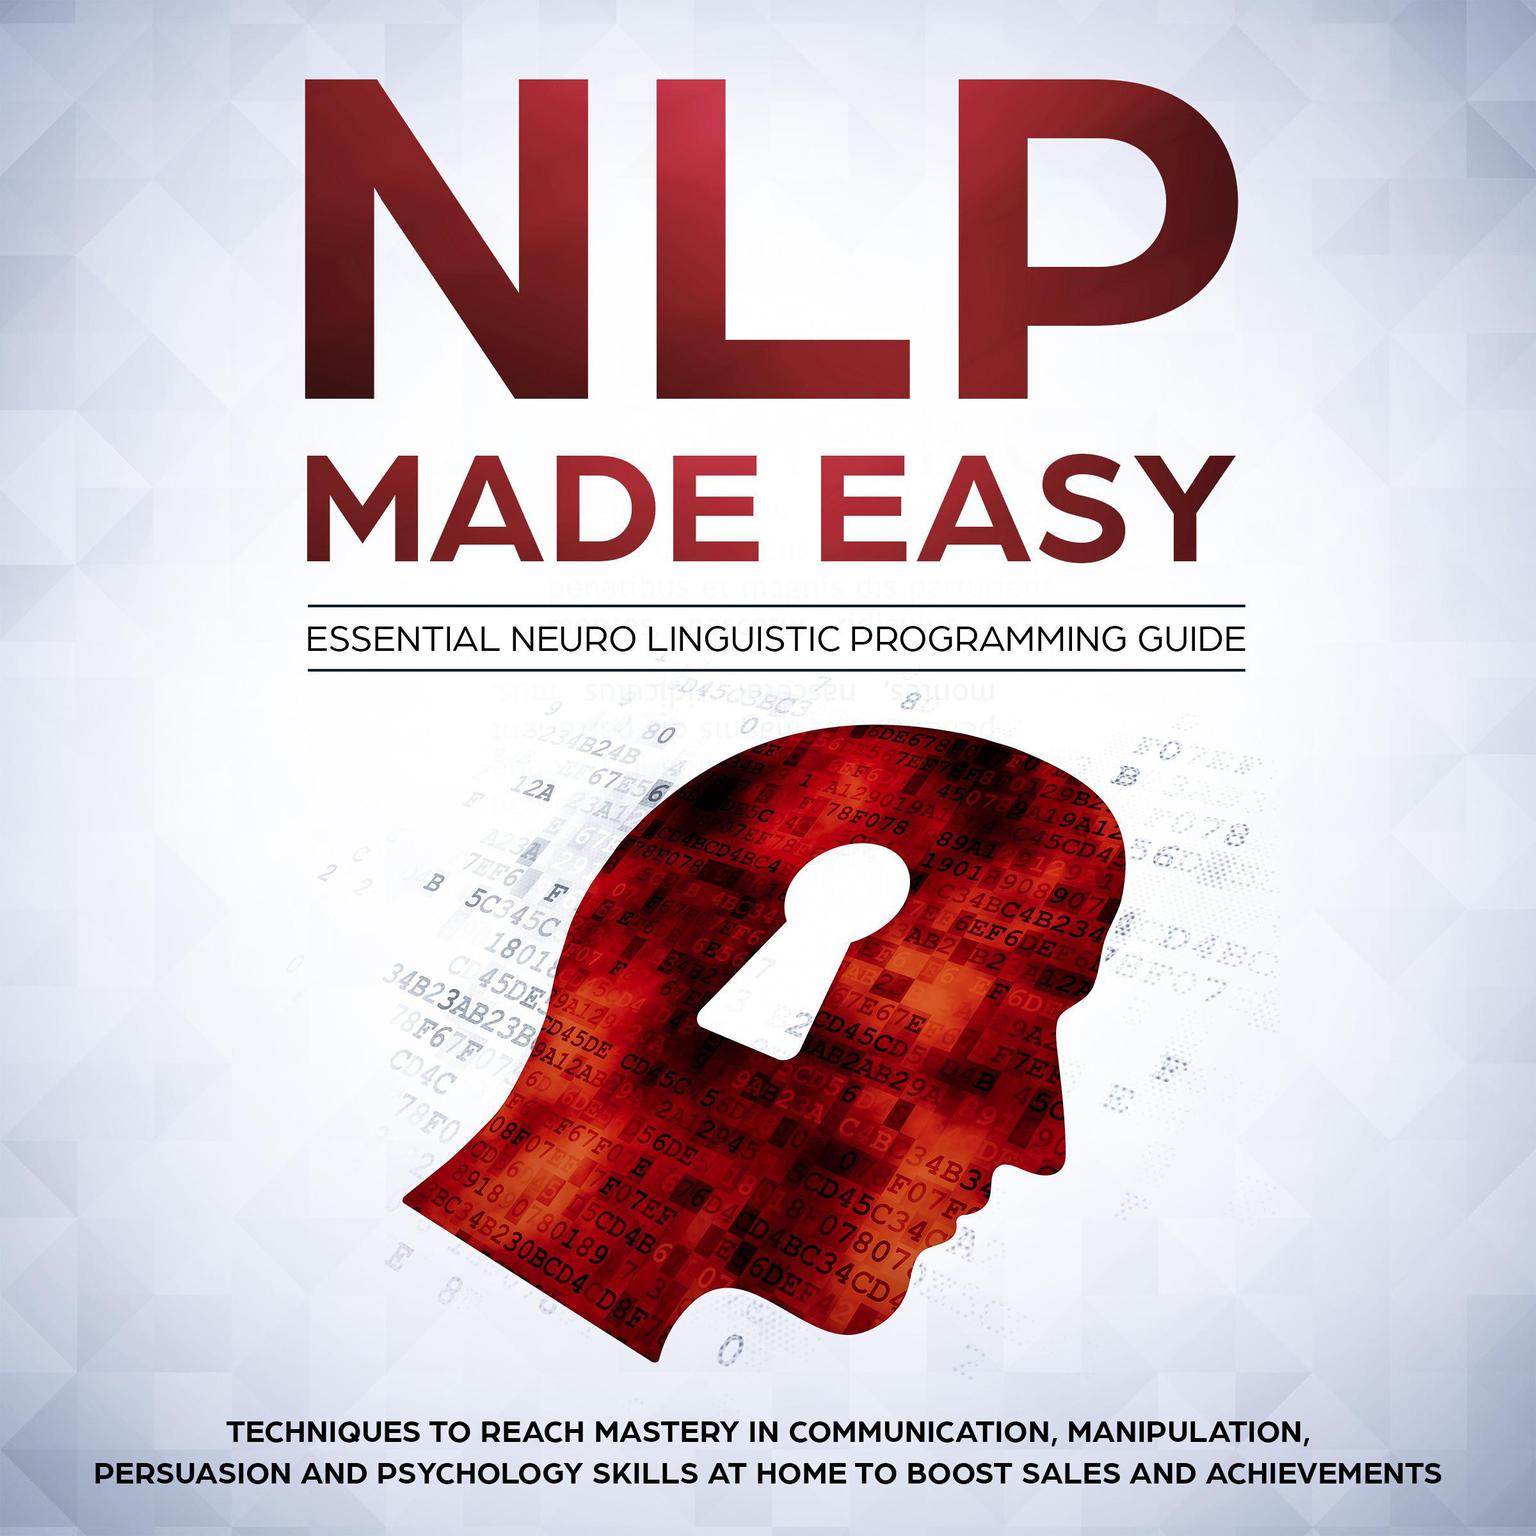 NLP Made Easy: Essential Neuro Linguistic Programming Guide: Techniques to reach Mastery in Communication, Manipulation, Persuasion and Psychology Skills at Home to boost Sales and Achievements Audiobook, by Phil Nolan